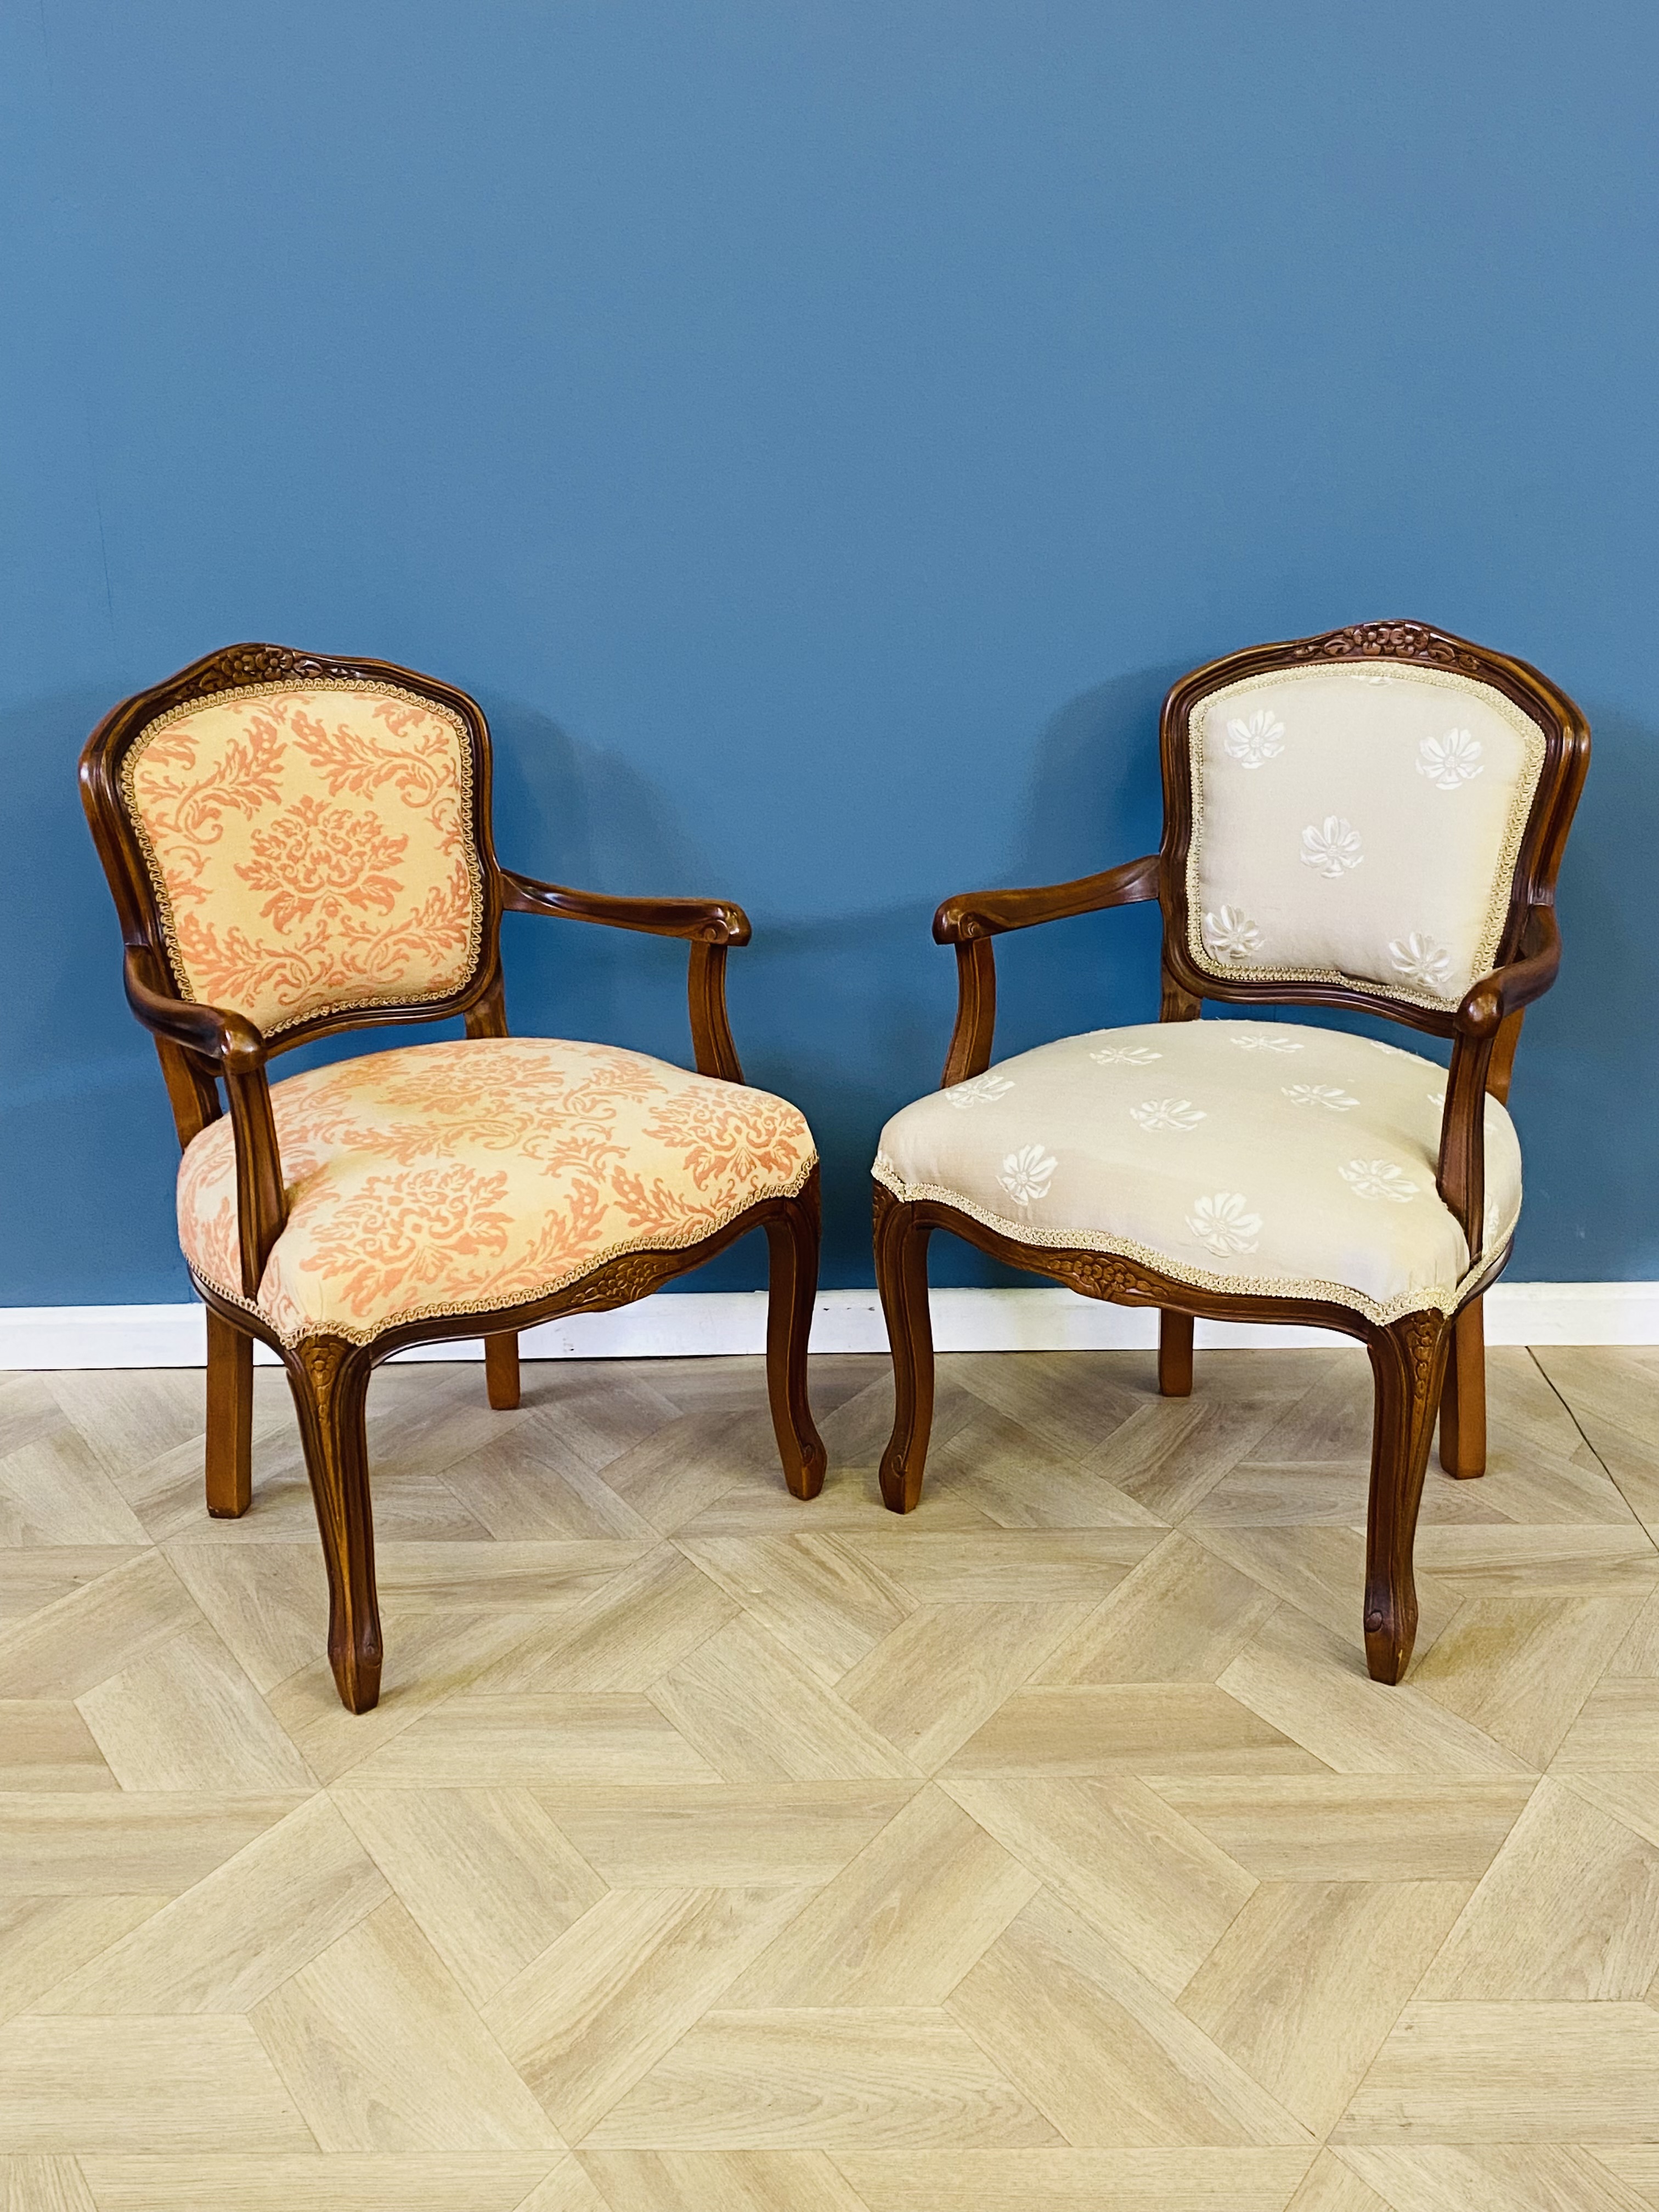 Pair of reproduction French style upholstered elbow chairs - Image 2 of 7